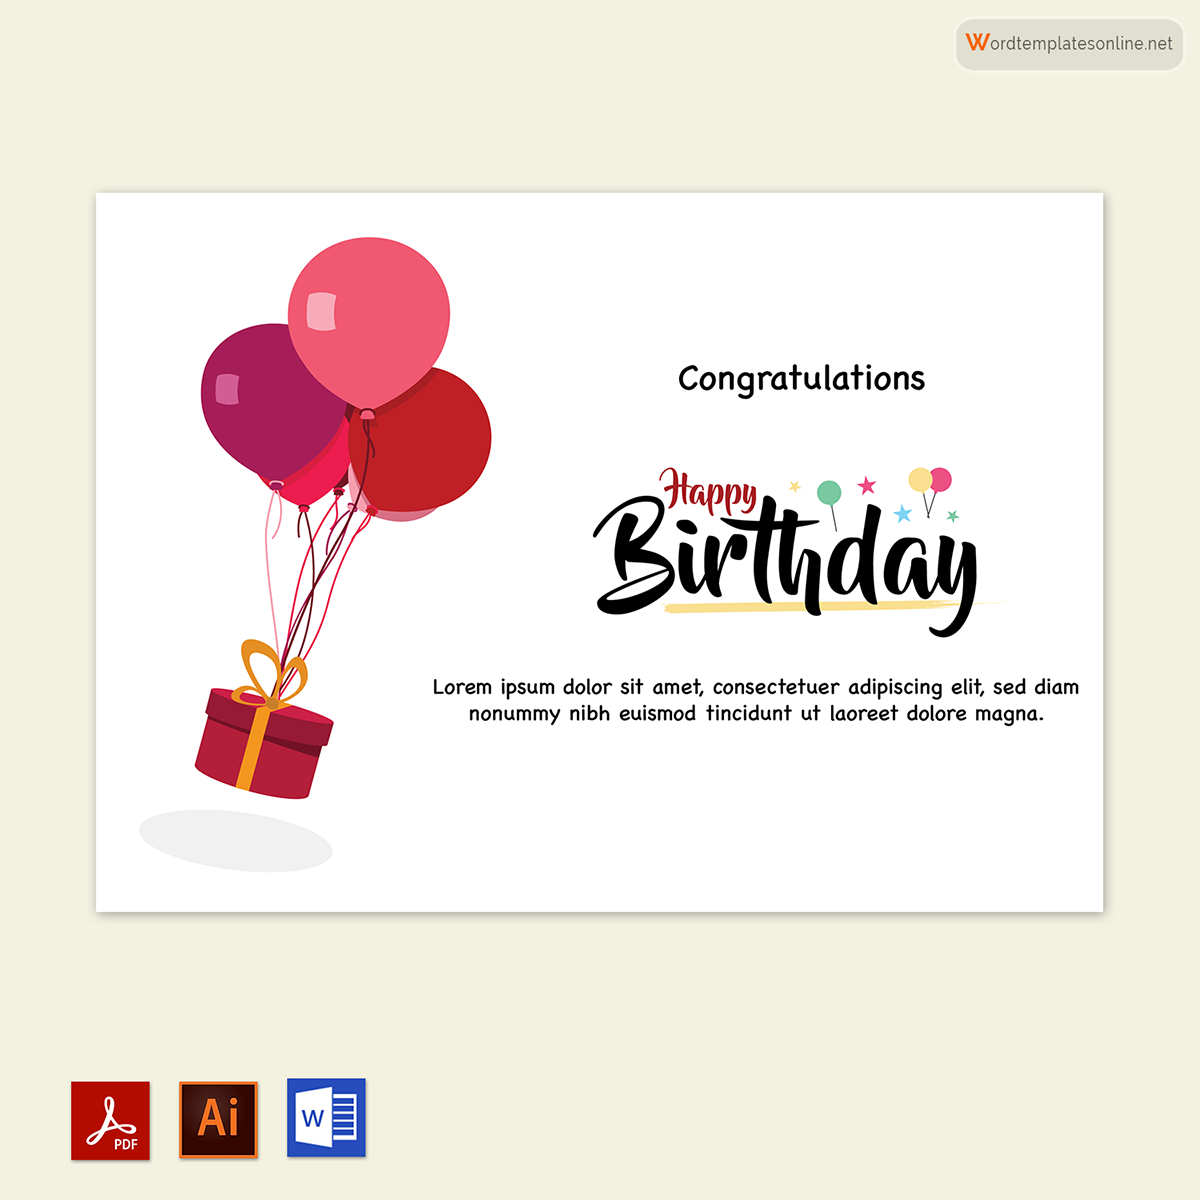 "Congratulations greeting card format in PDF"